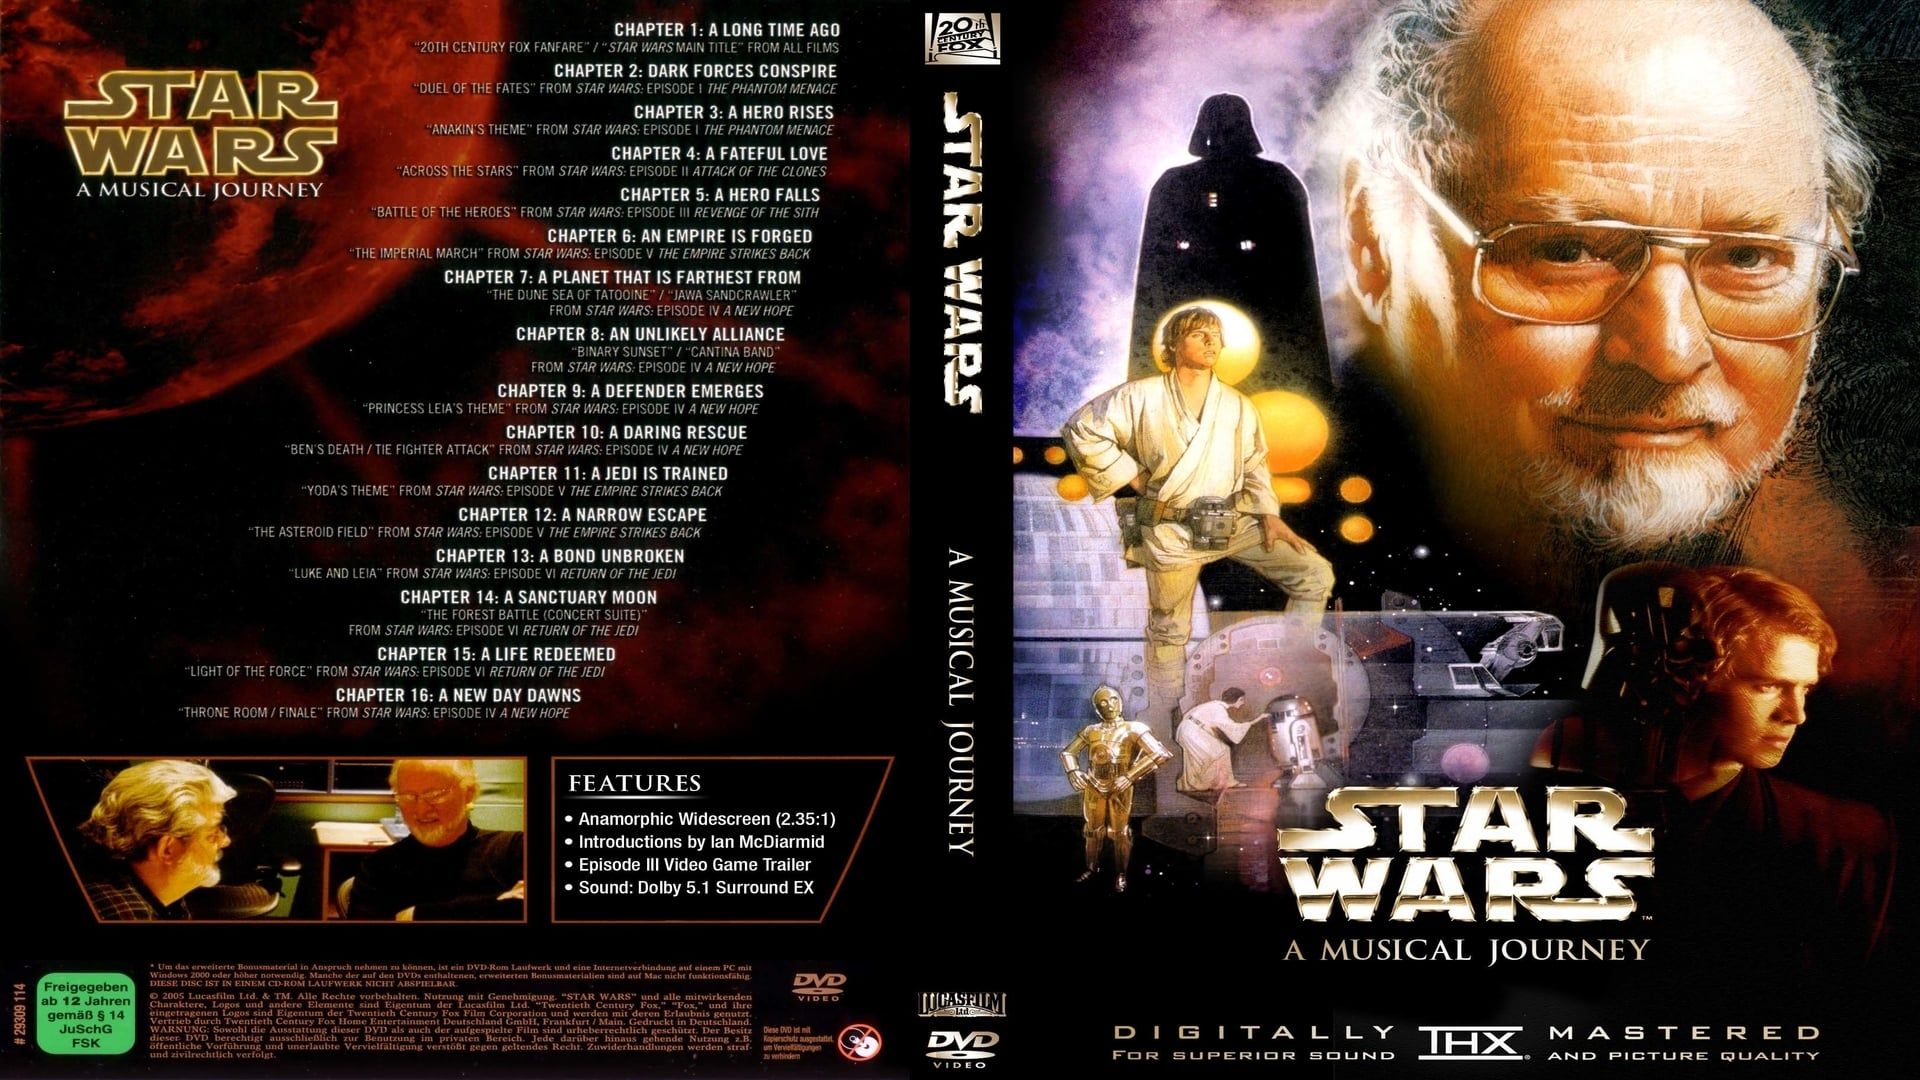 Star Wars: A Musical Journey background